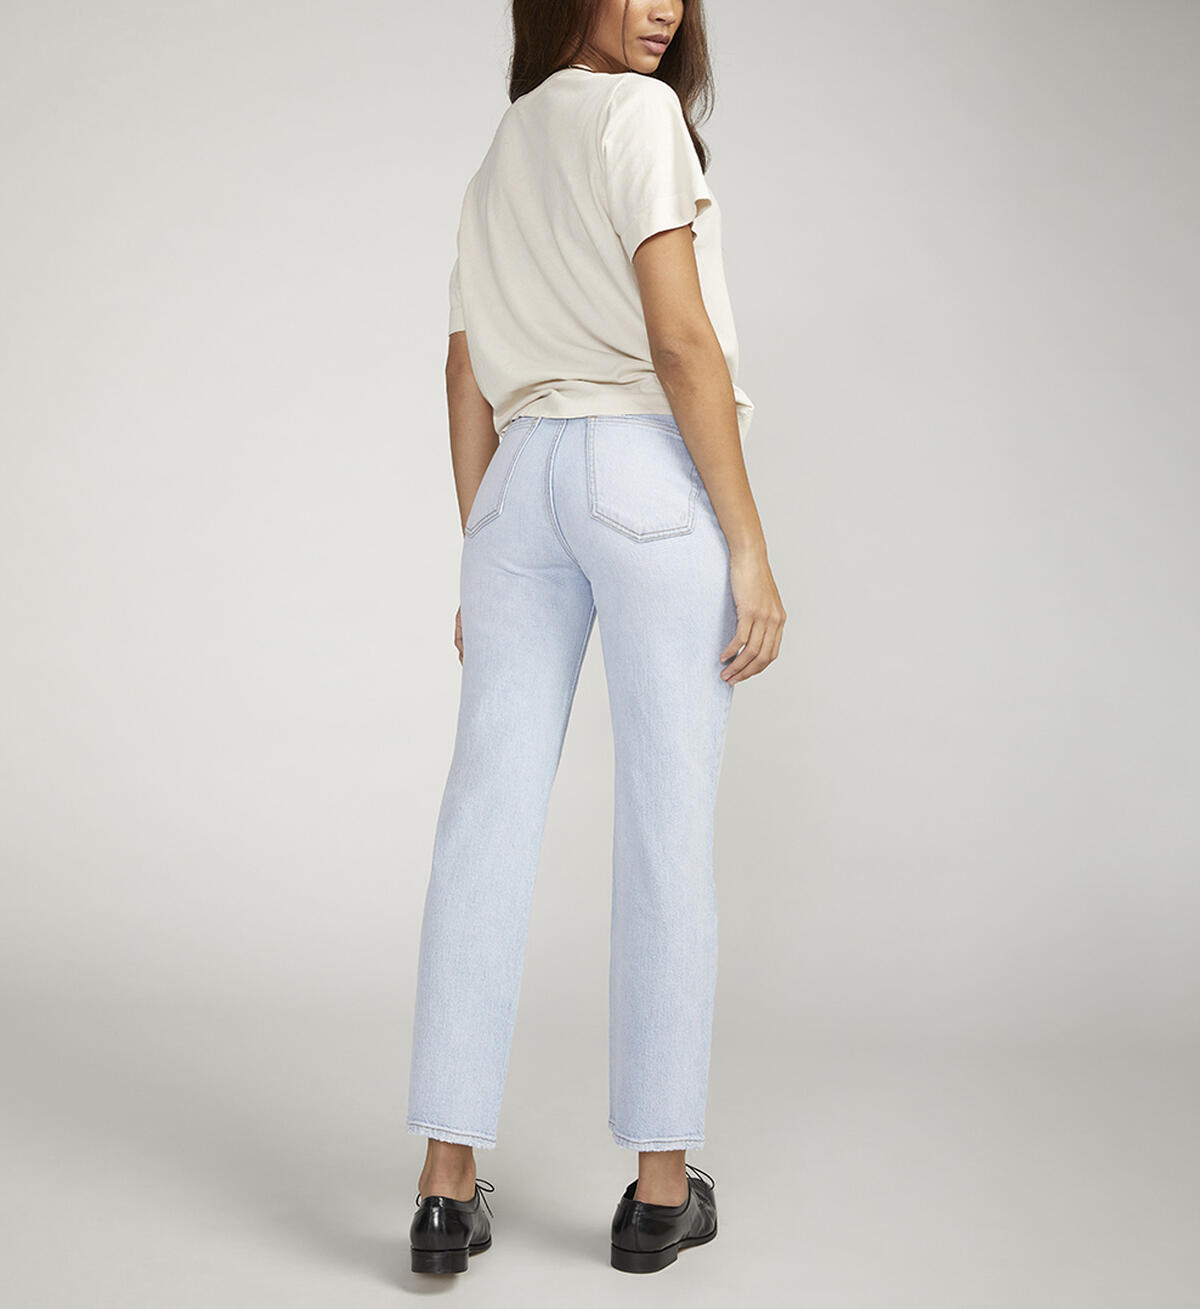 Highly Desirable High Rise Straight Leg Jeans, , hi-res image number 4